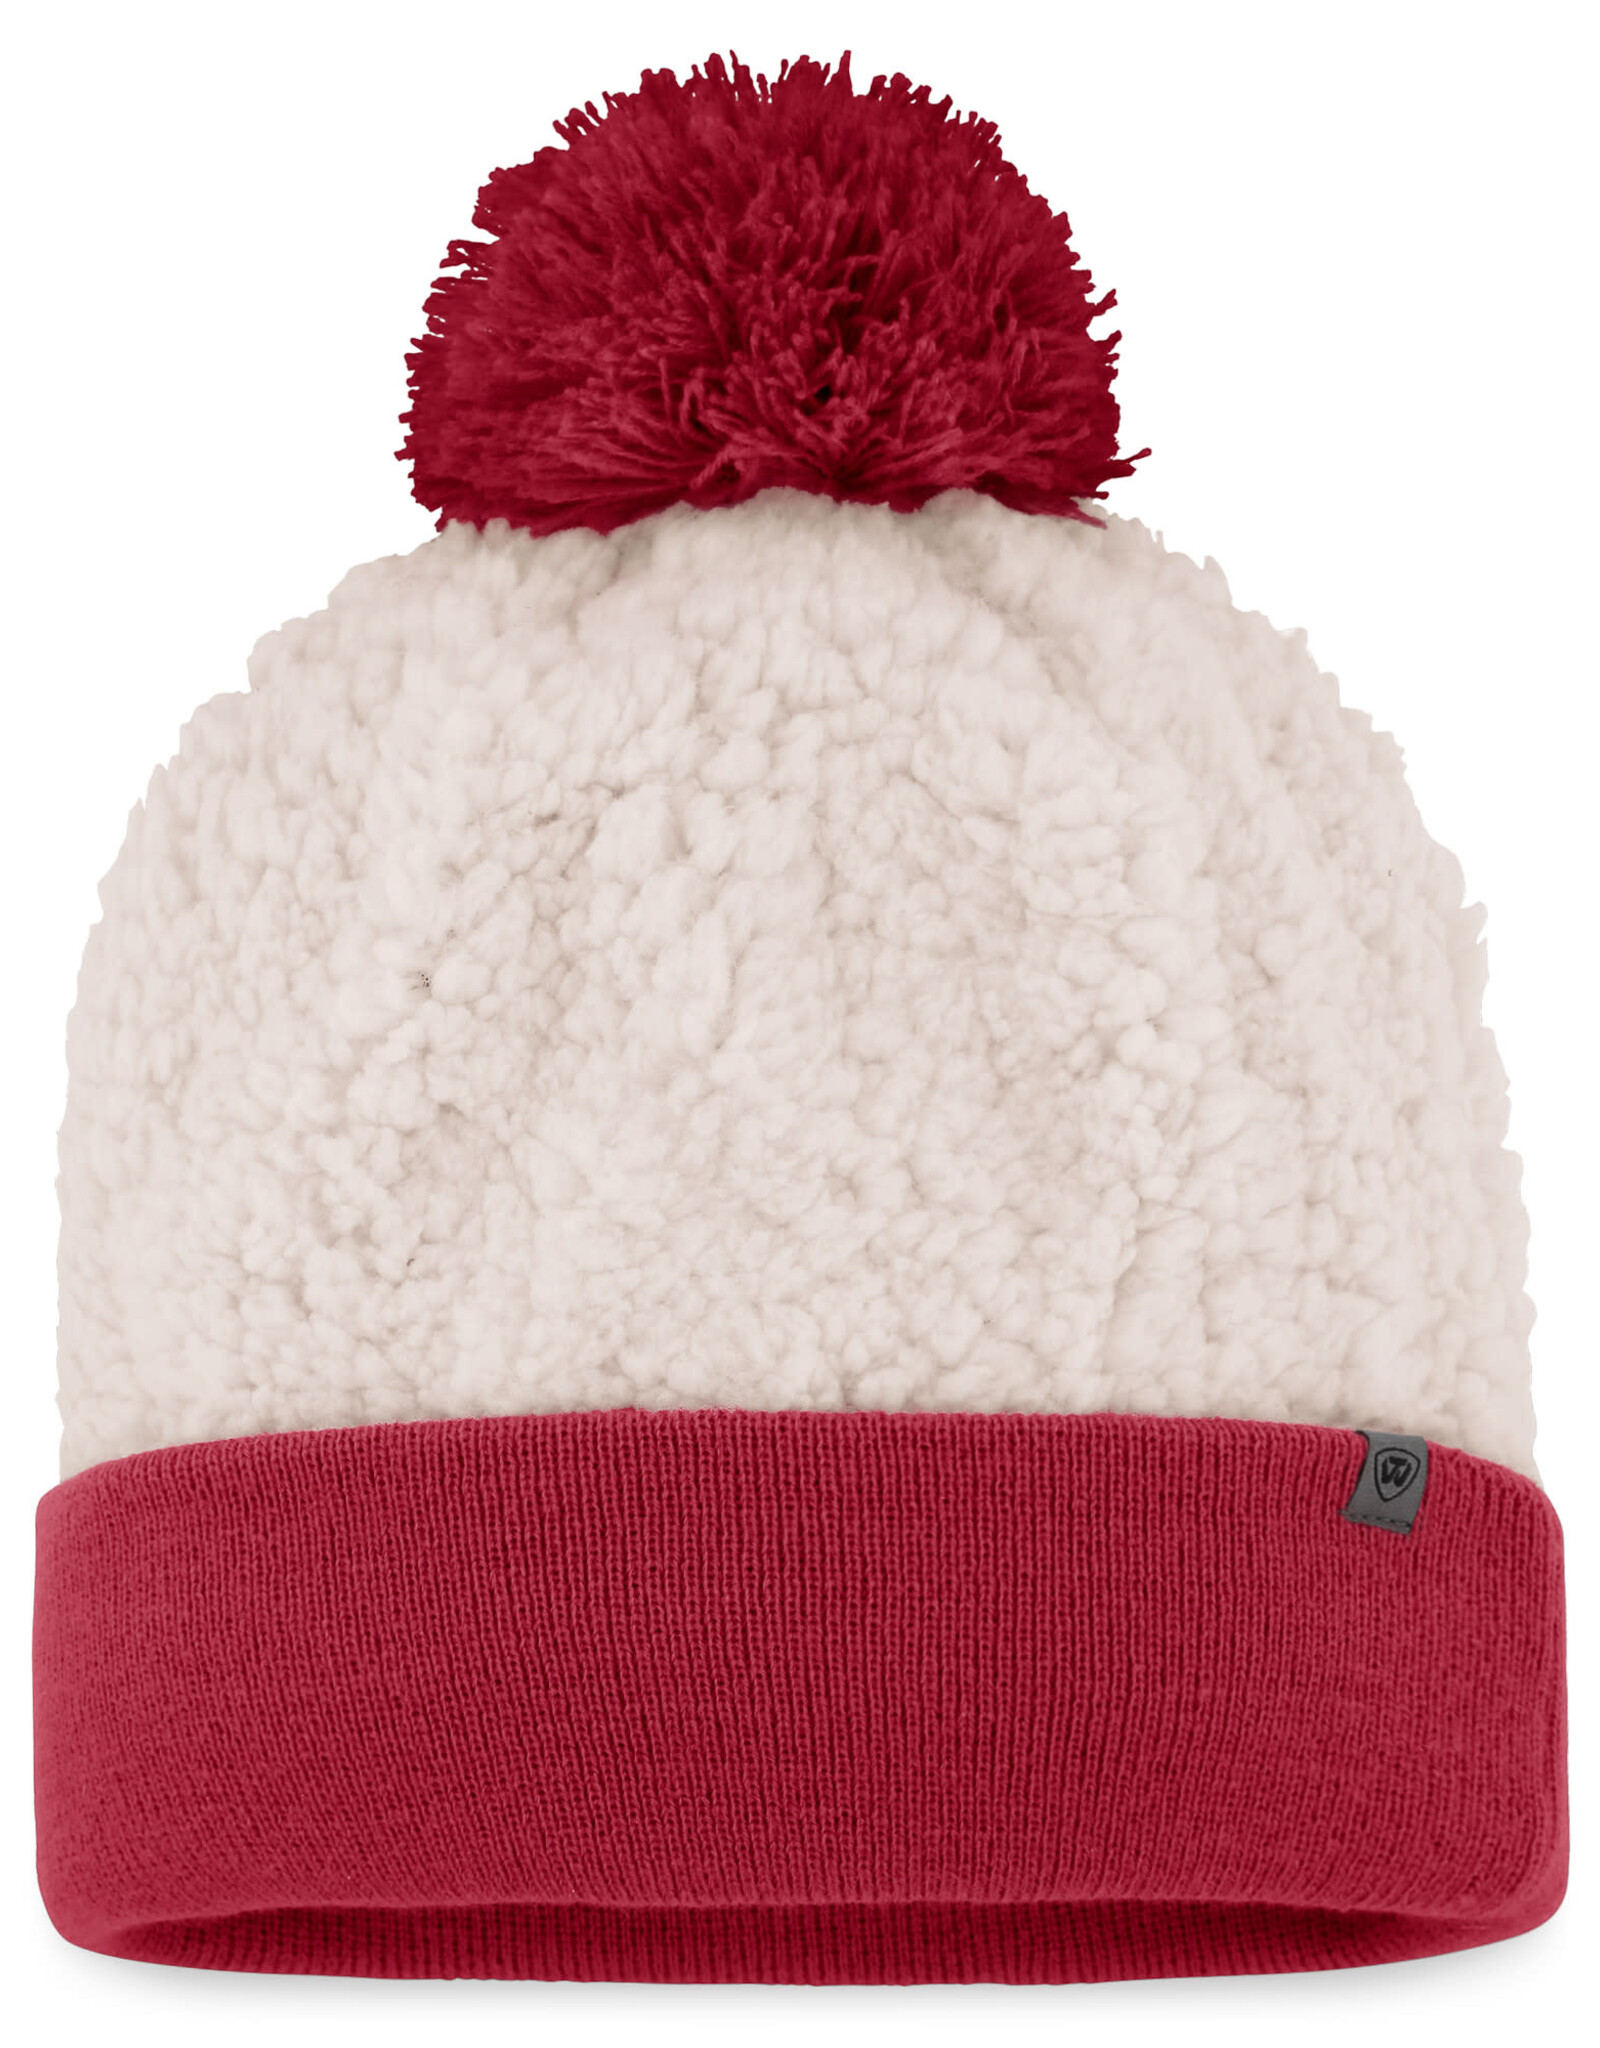 Top of the World TOW OU Grace Sherpa Cuff Pom Beanie